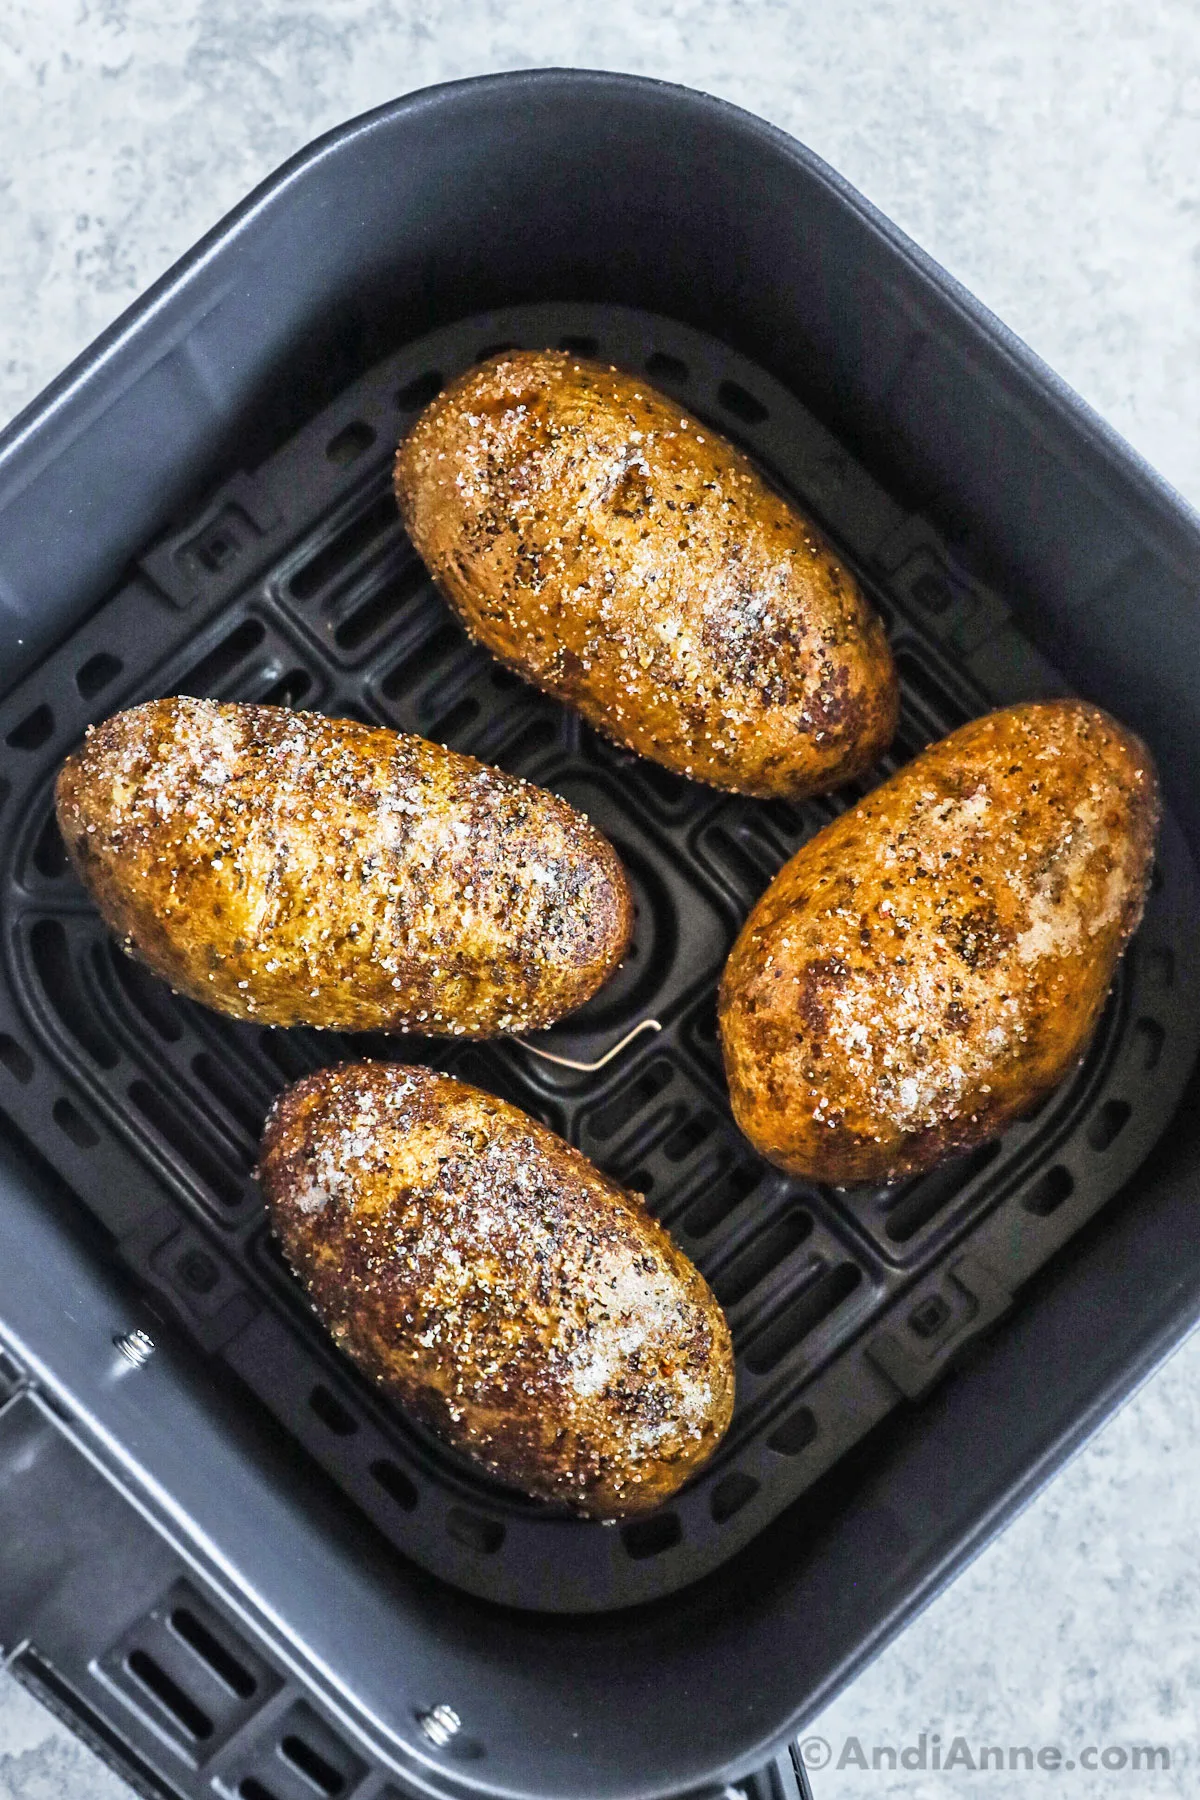 An air fryer basket with baked russet potatoes inside.